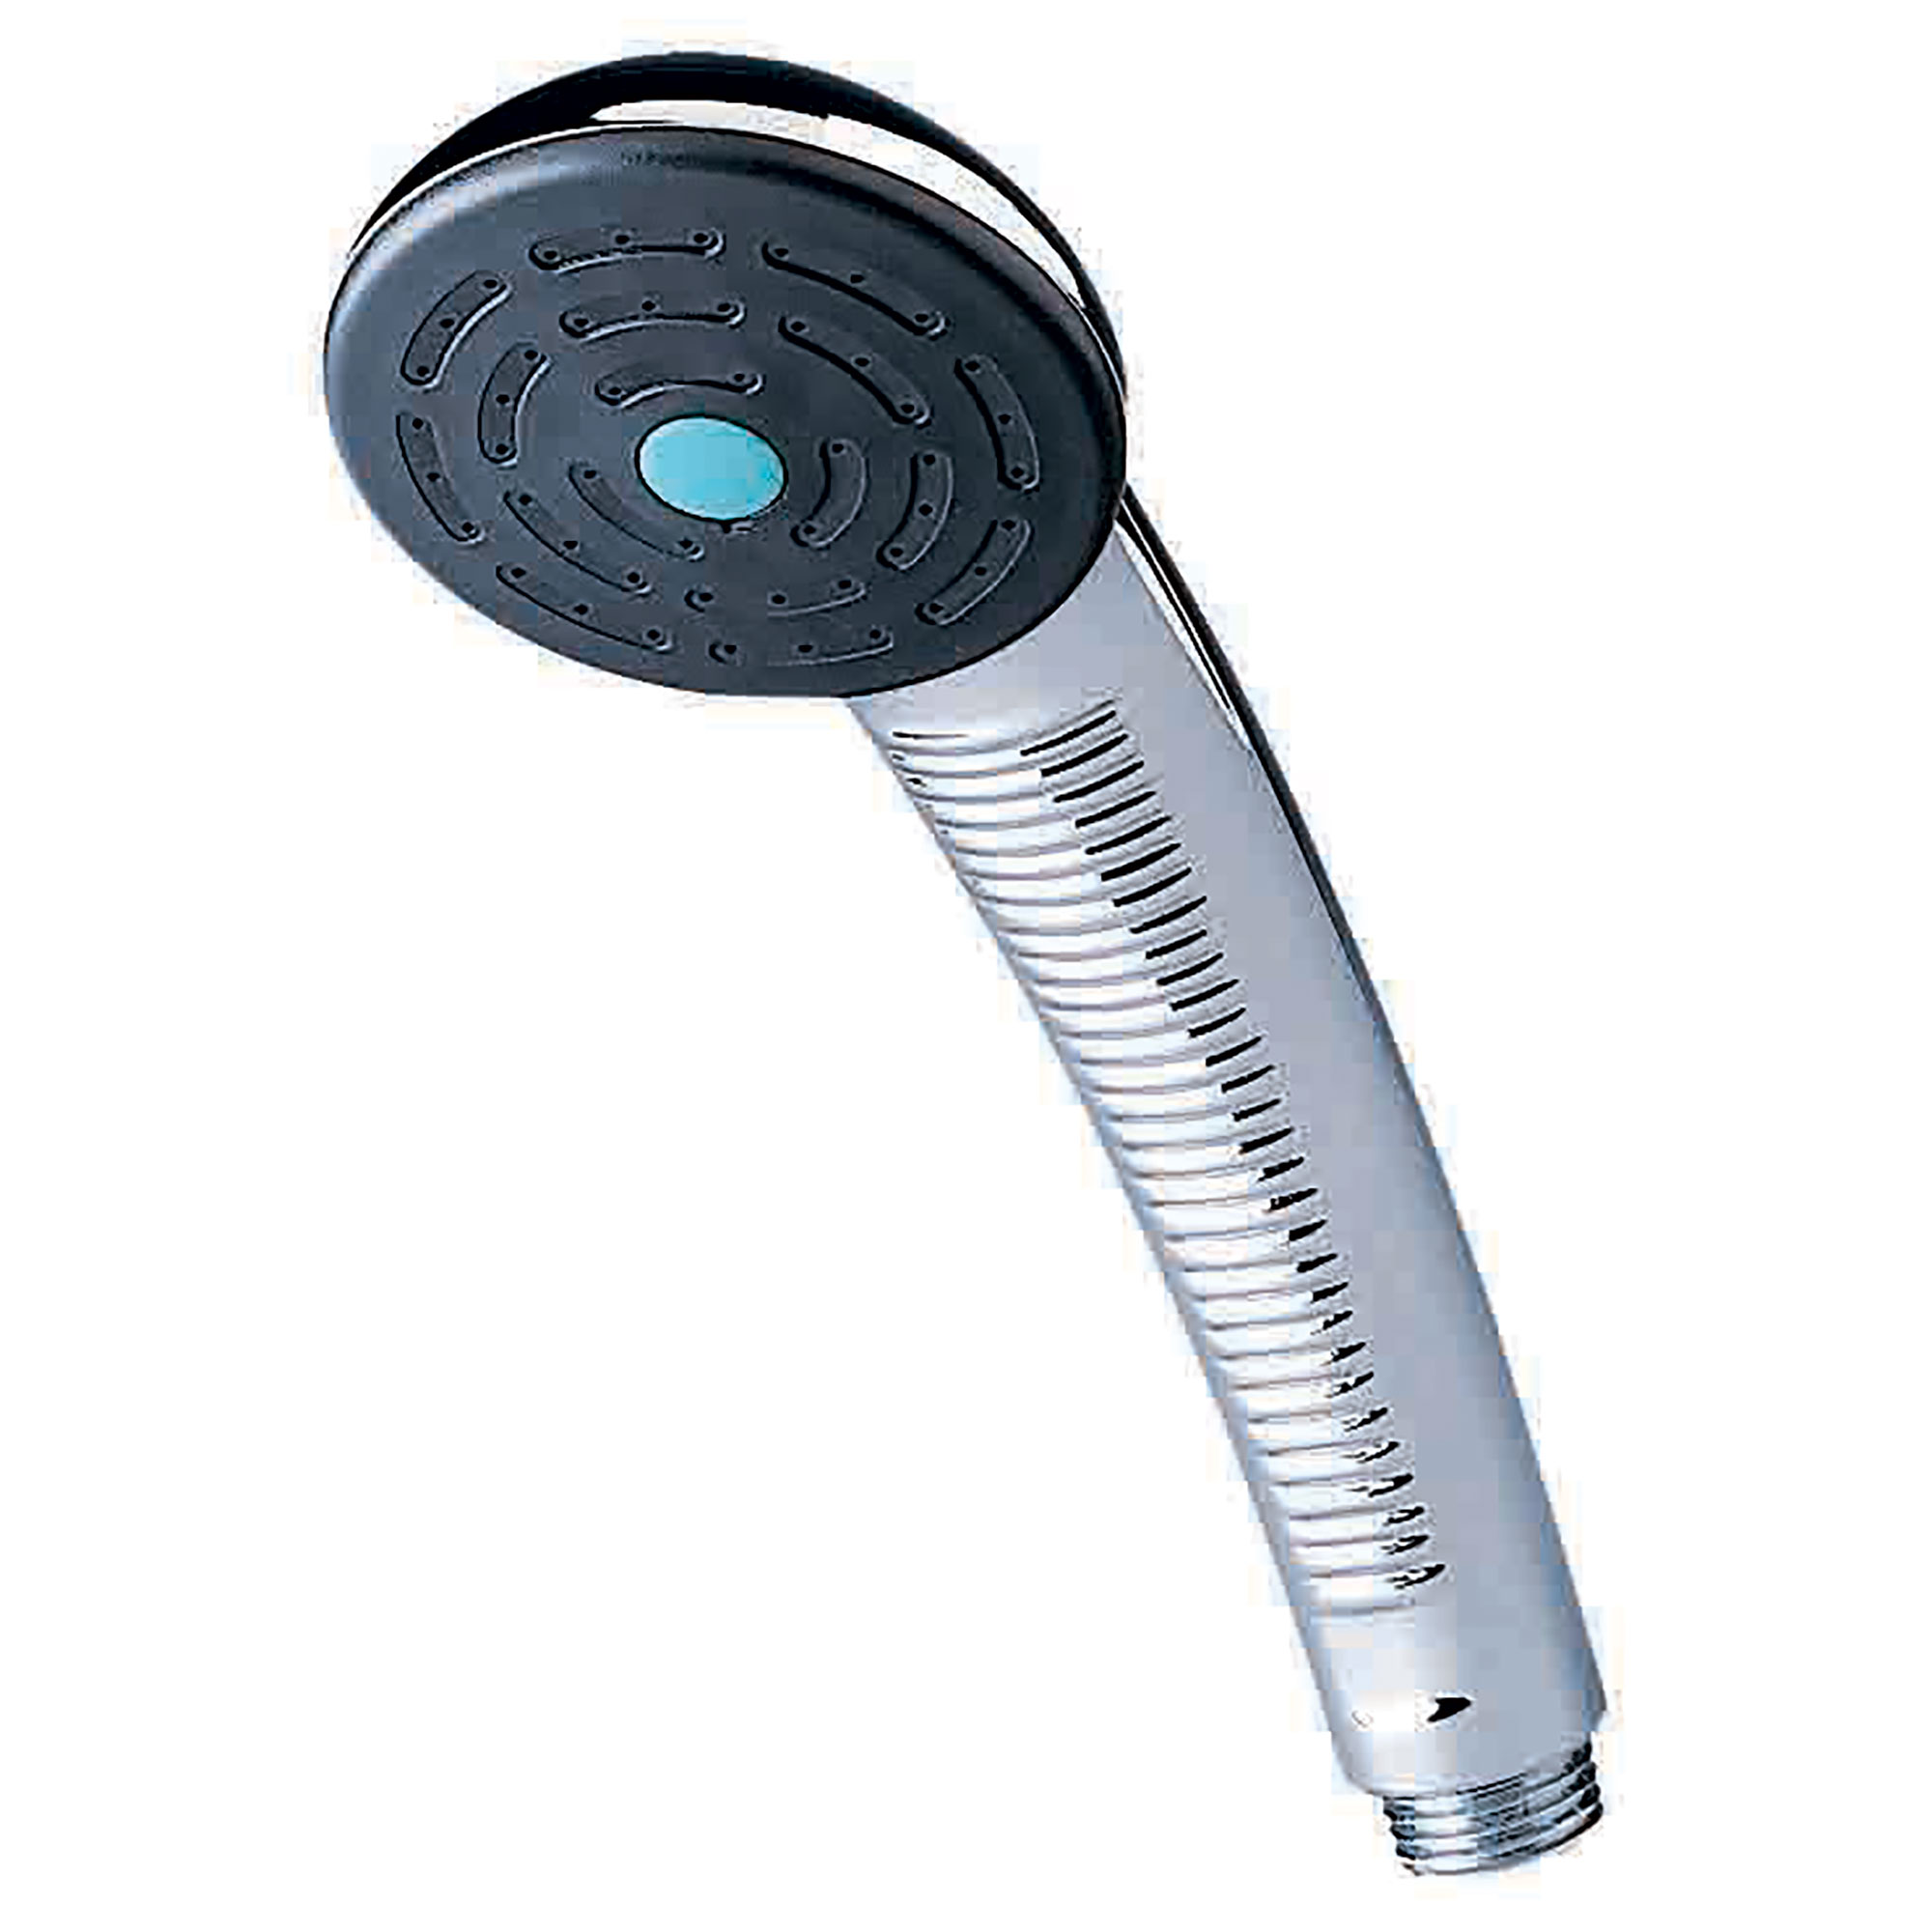 Fixed 2.5 gpm/9.5 L/min Single-Function Hand Shower